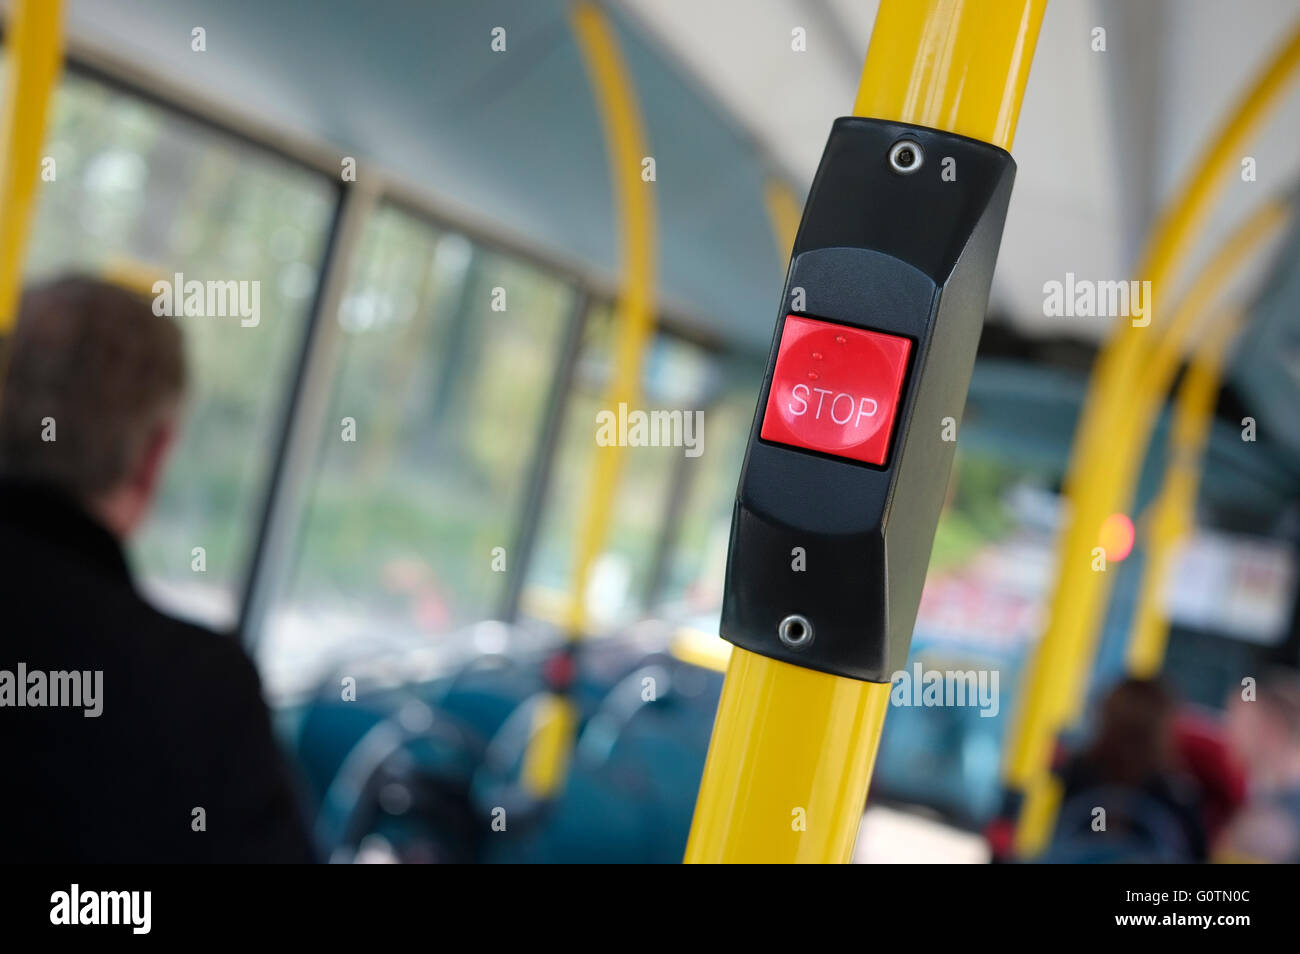 public transport bus stop red button Stock Photo